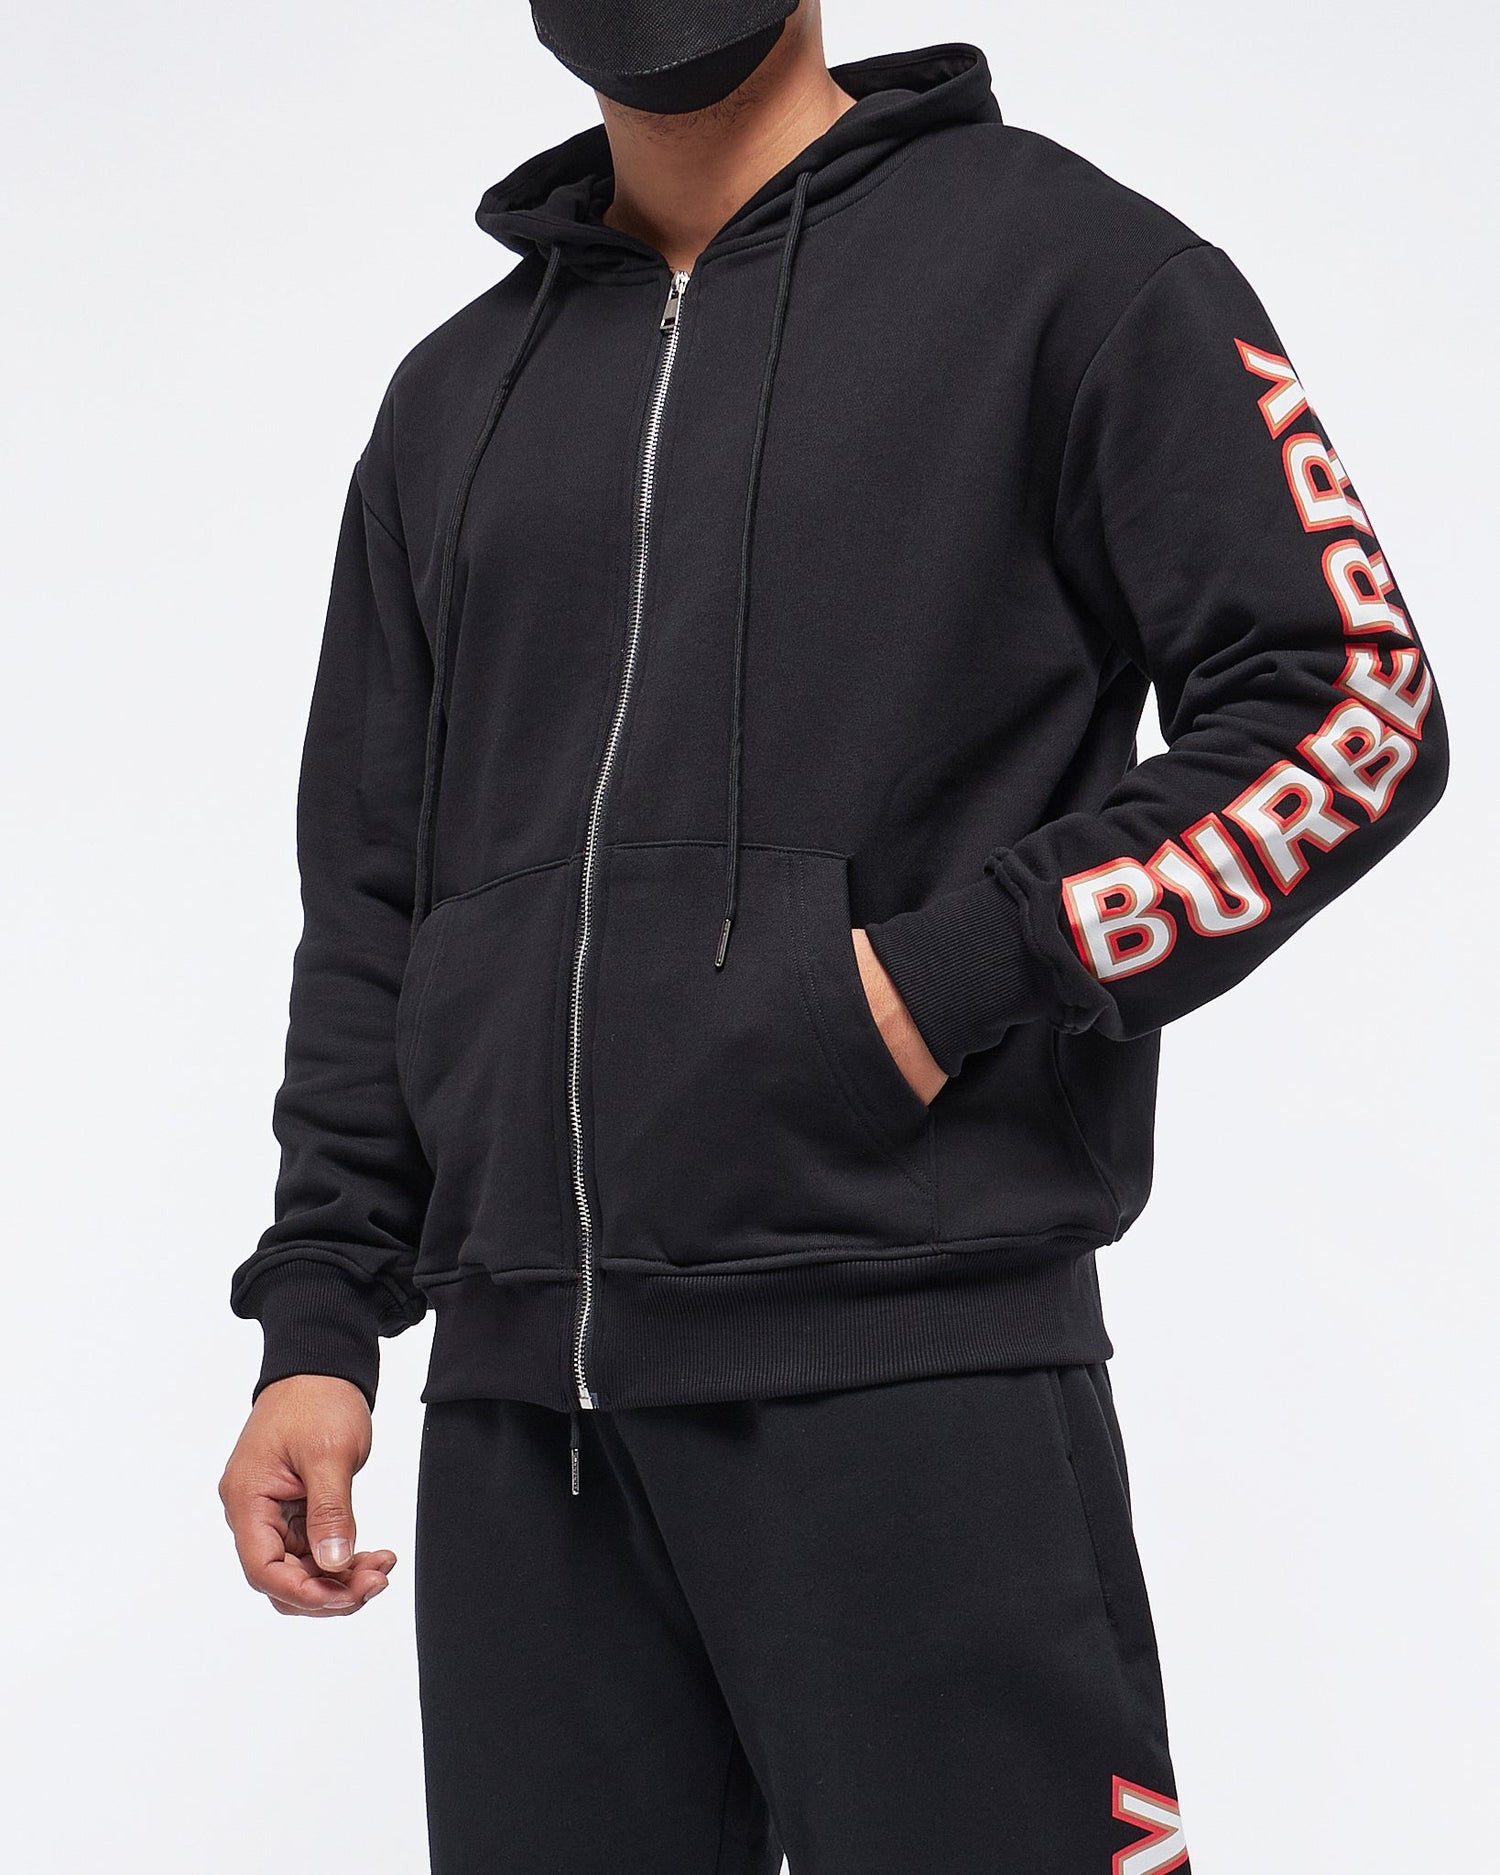 MOI OUTFIT-Vertical Sleeve Logo Printed Men Hoodie Zipped 39.90